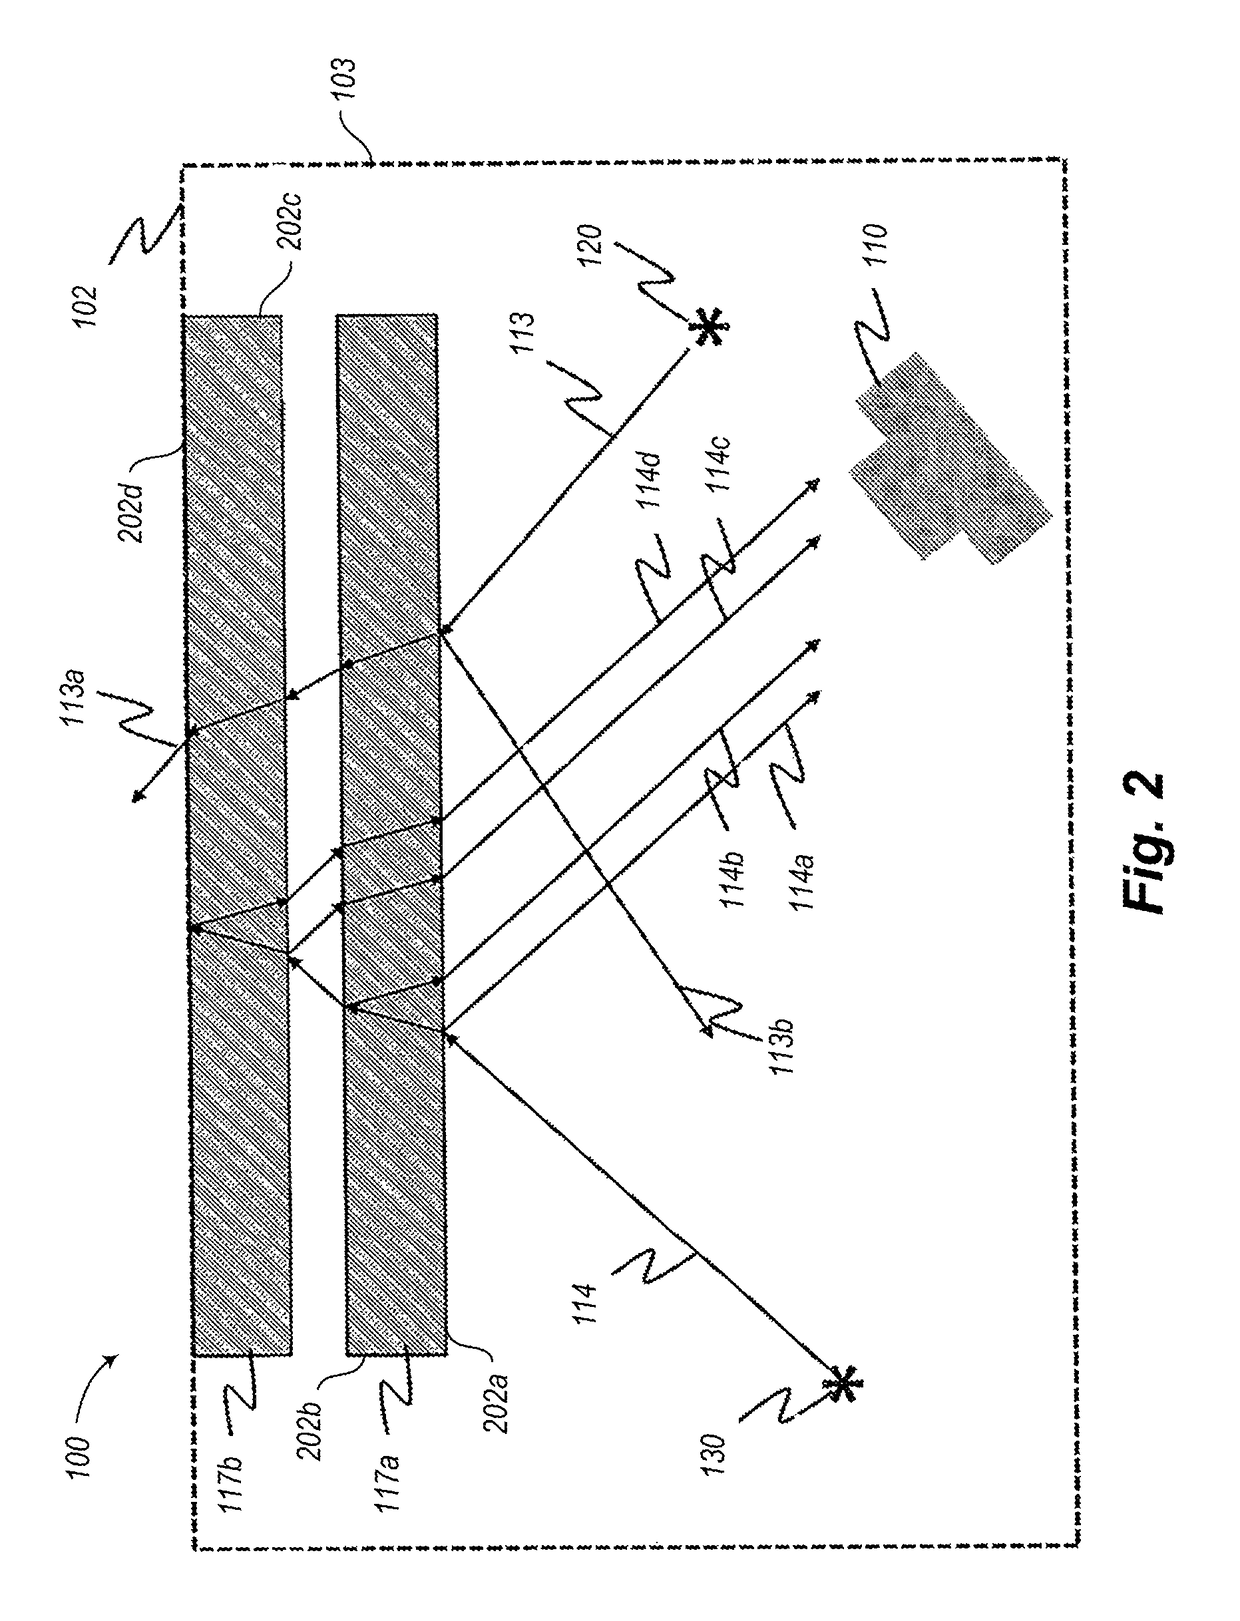 Data collection system and method that detect electronic device displays via fresnel patterns